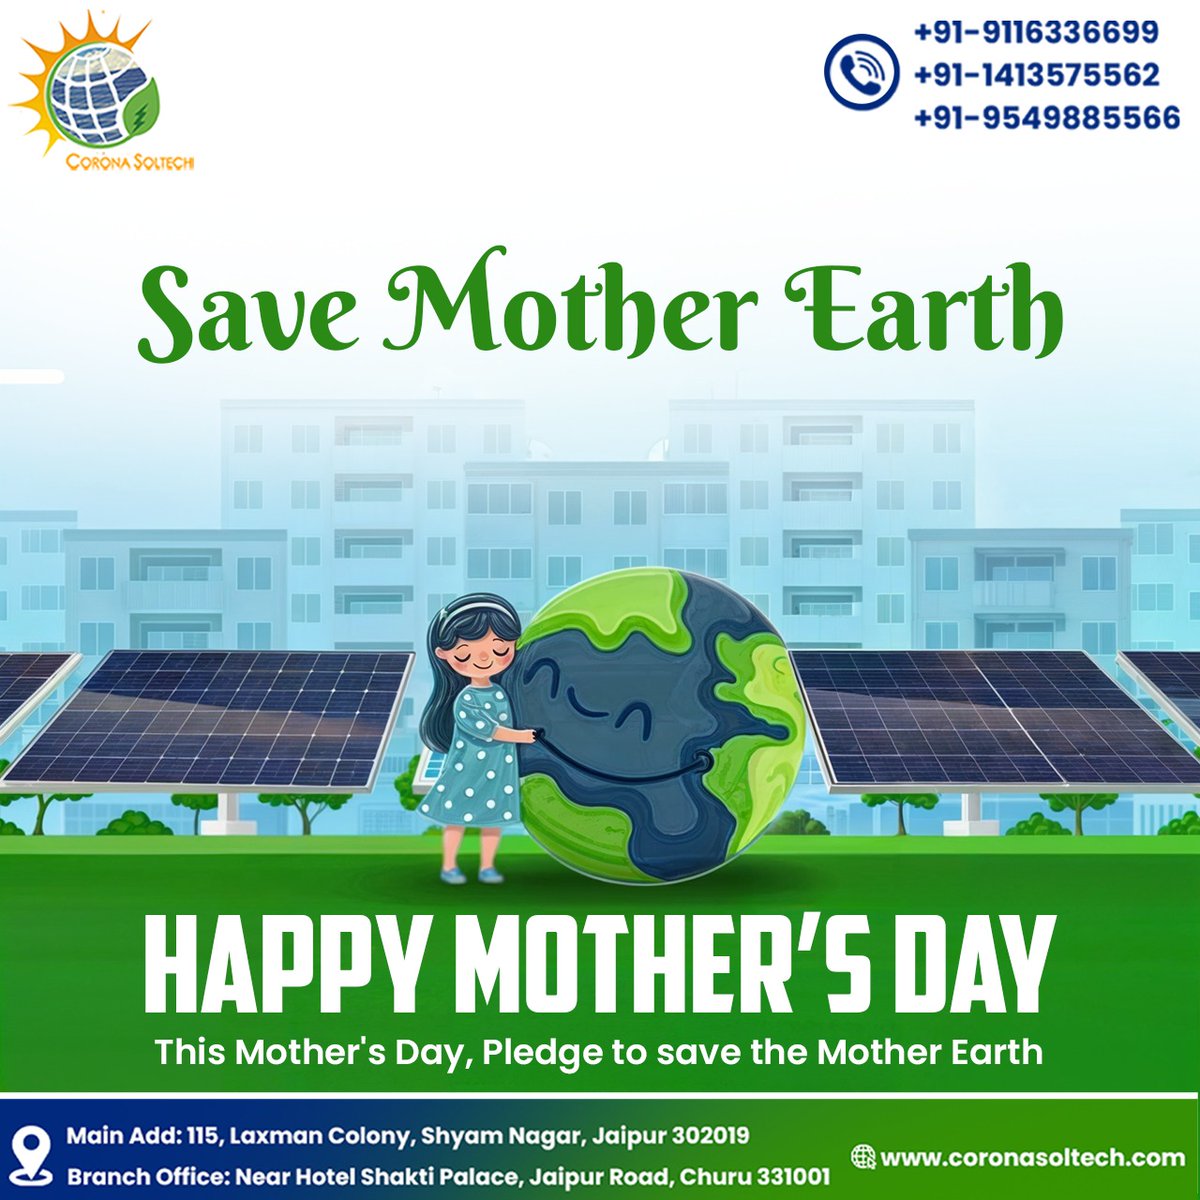 This Mother's Day, let's give Mom the greatest gift of all - a healthy planet. We can all do our part to save Mother Earth by switching to clean, sustainable energy solutions like solar power. ☀️ #MothersDay #SaveMotherEarth #GoSolar #CoronaSoltech #SustainableLiving